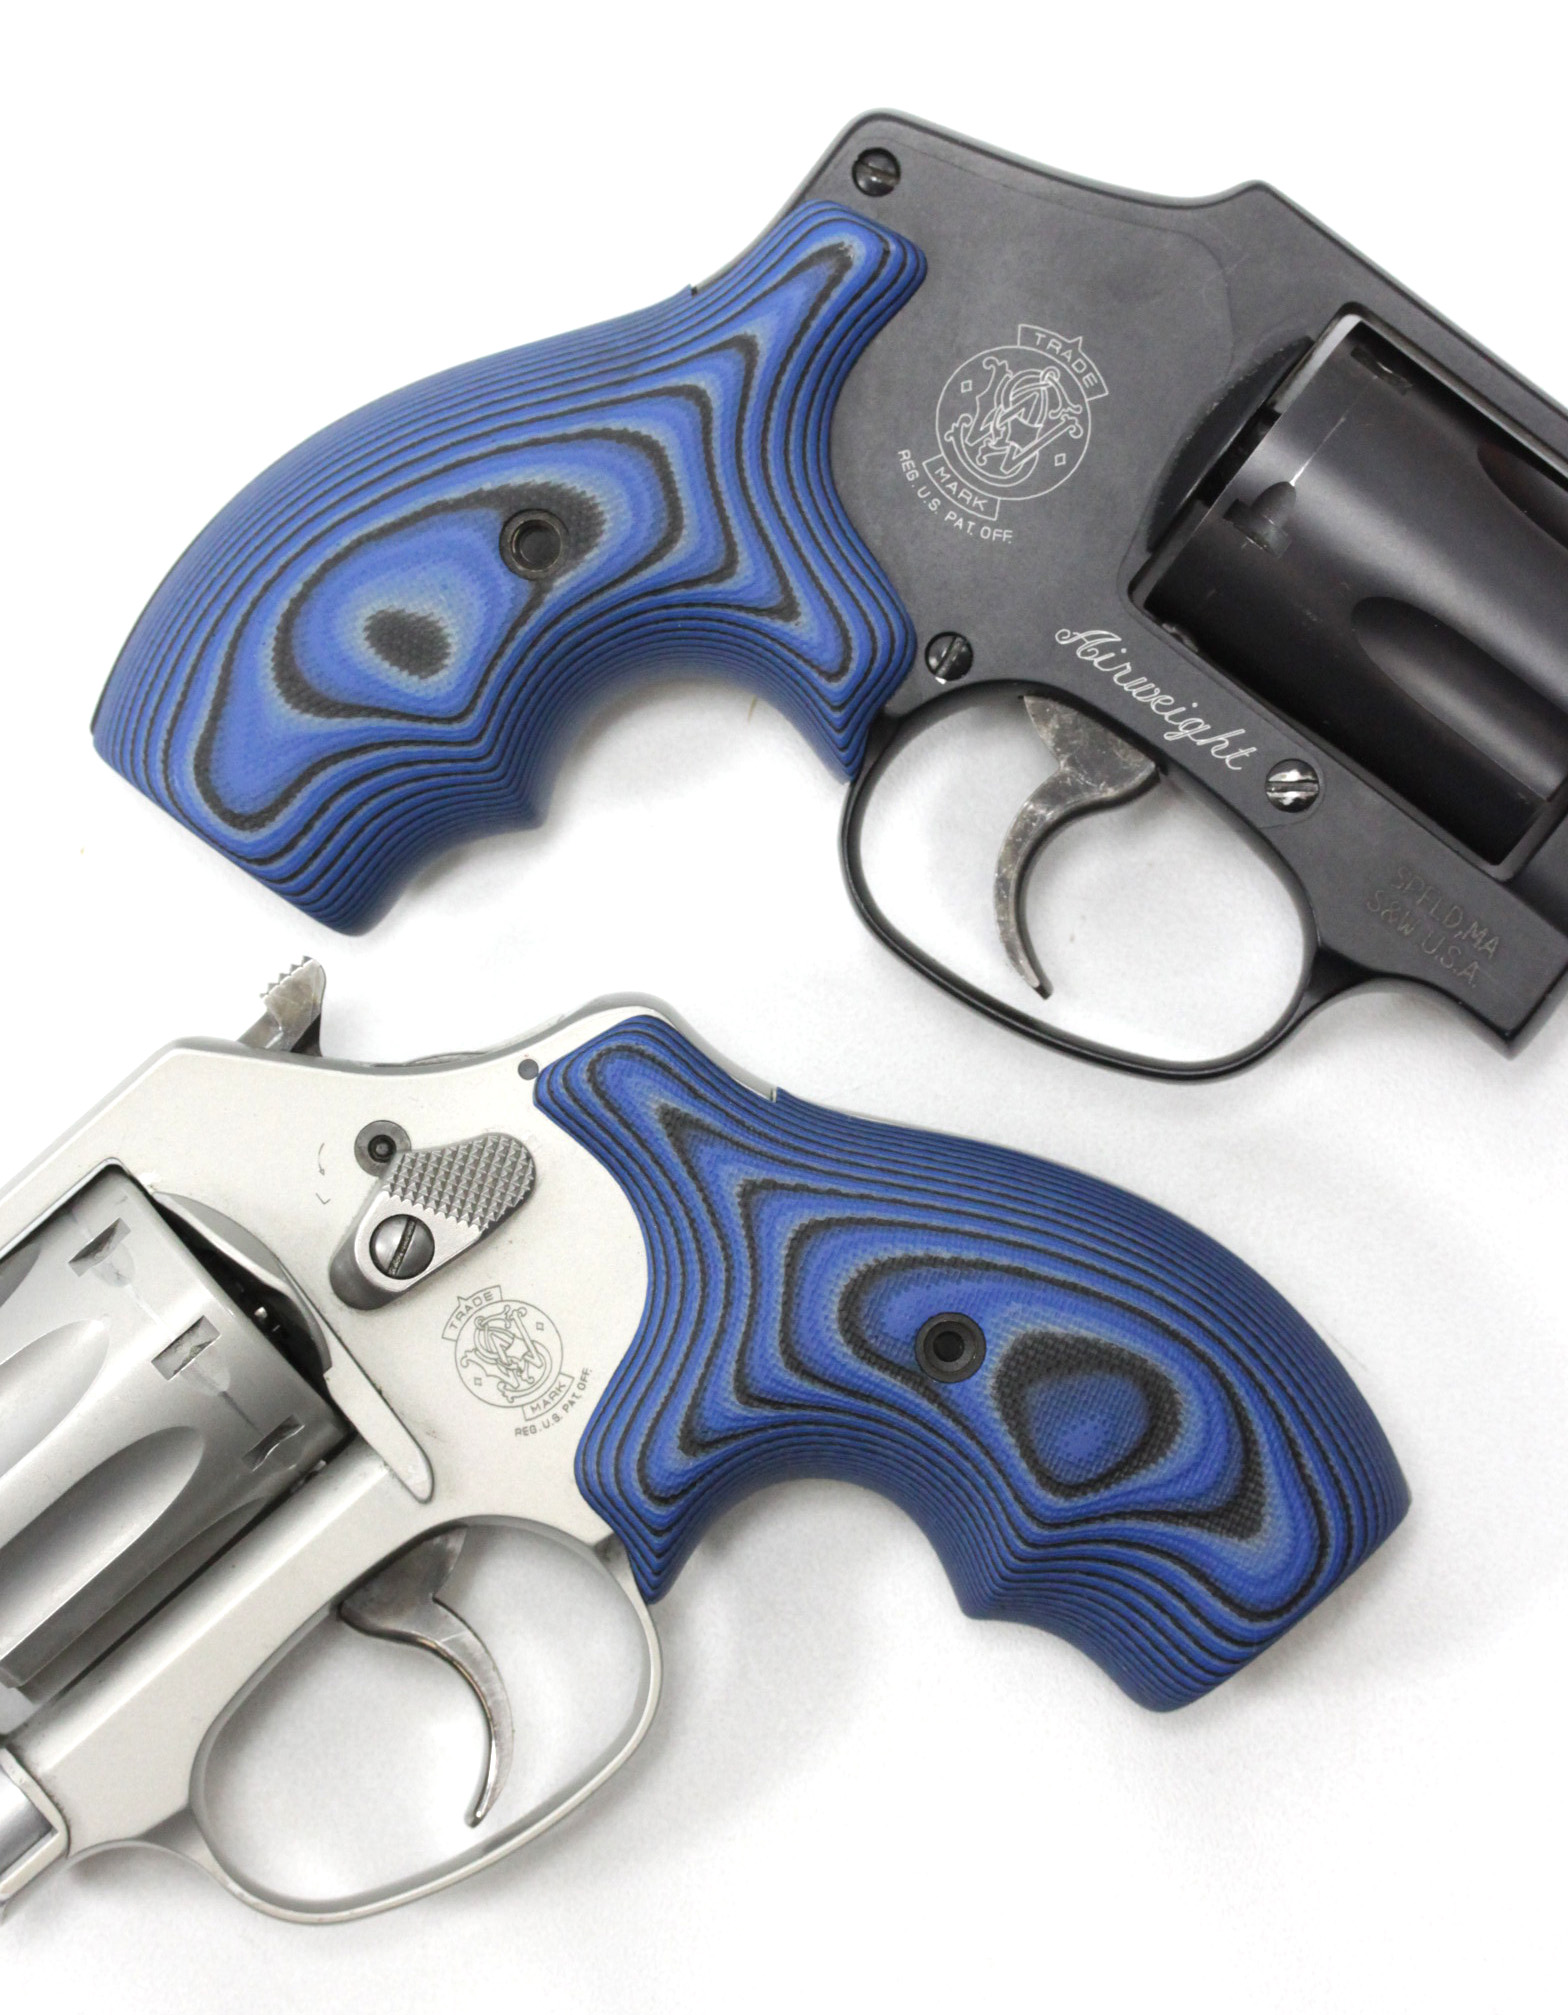 Smith and wesson grips revolver